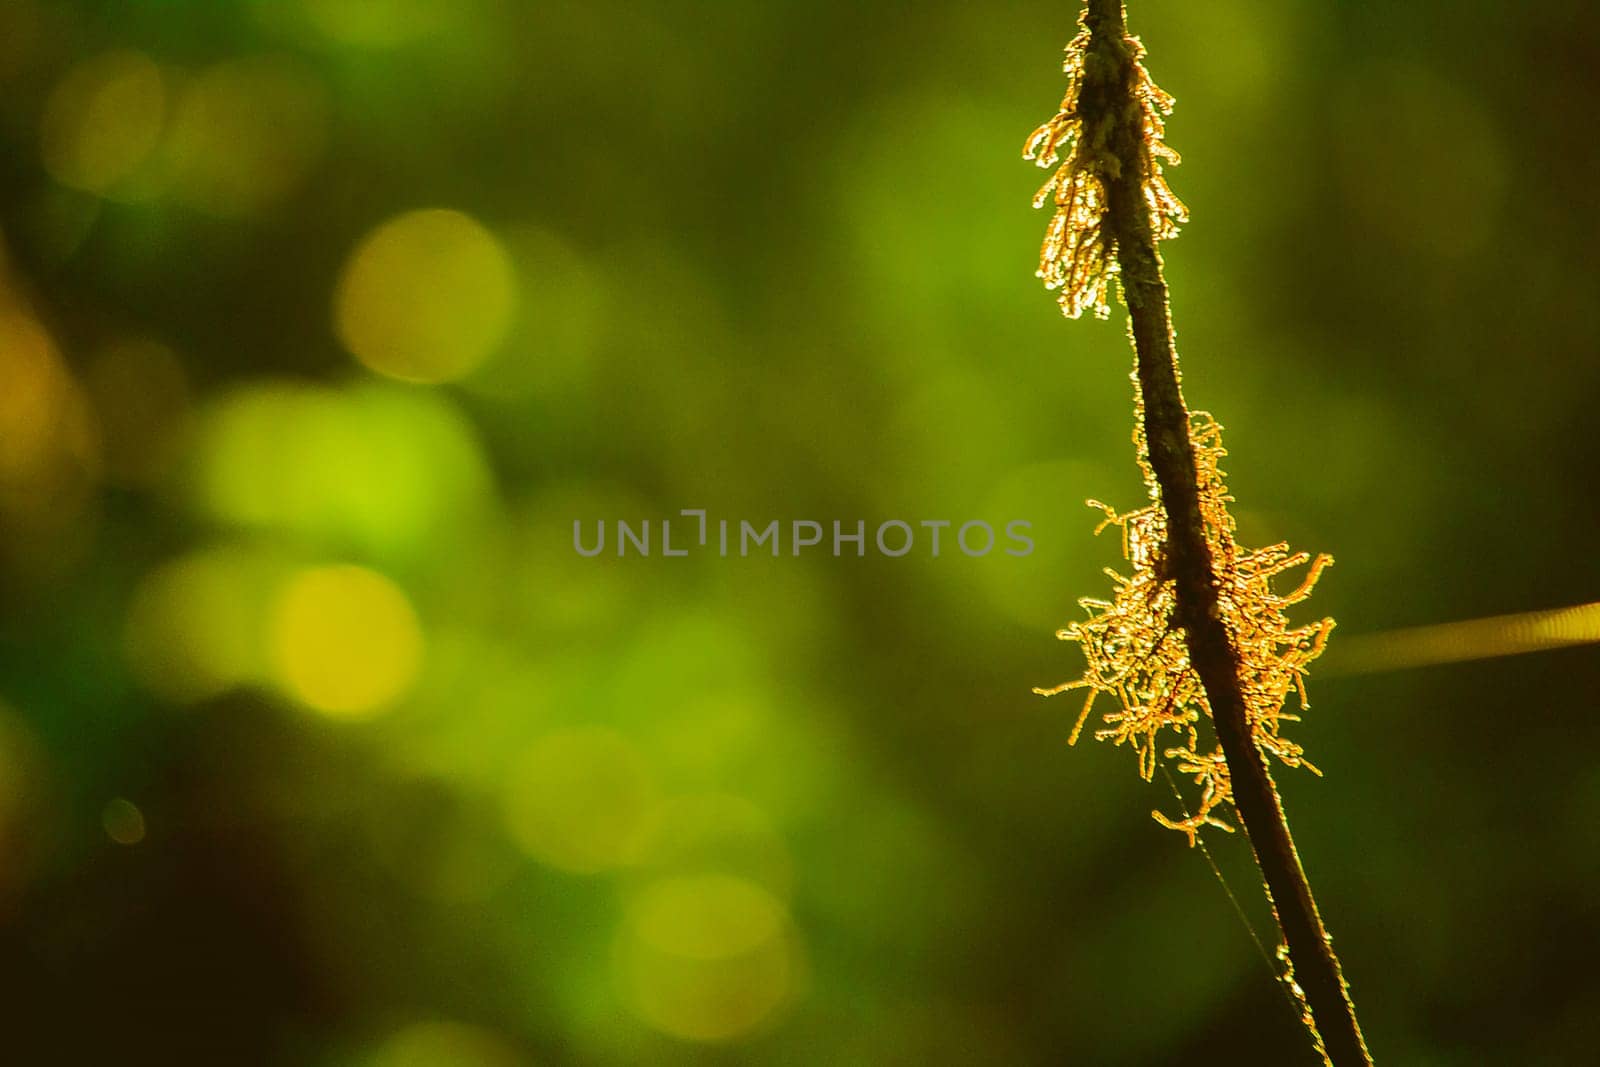 The sunrise light that shines on Moss on the tree by Puripatt